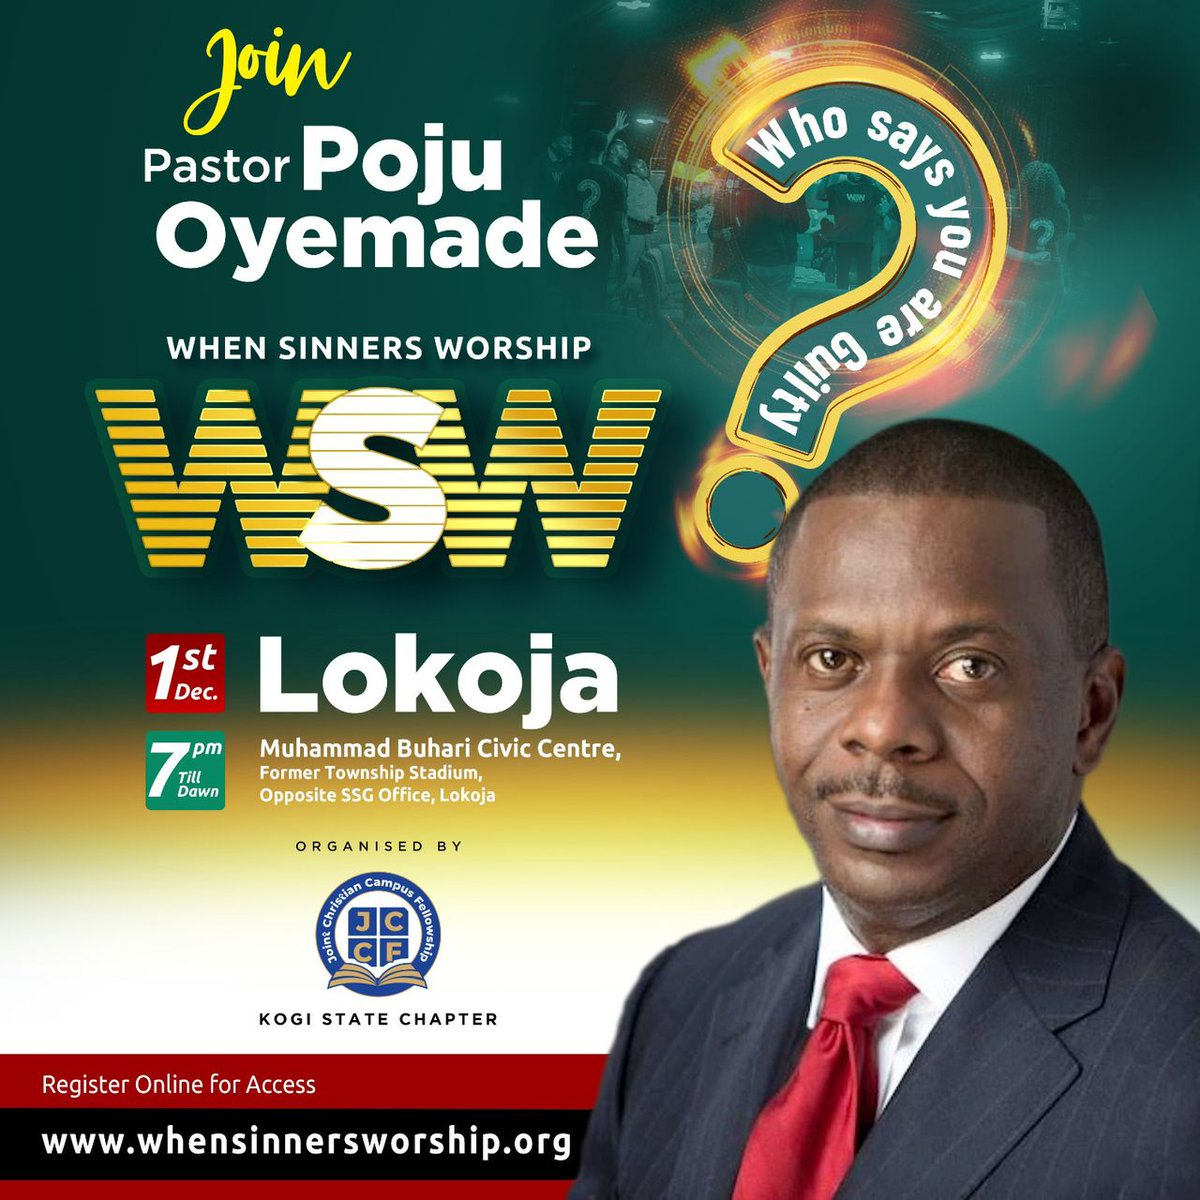 Kogi get ready for an uplifting worship experience. Mark your calendars for a divine rendezvous on 1st December at When Sinners Worship as we will be graced by @pastorpoju you don't want to miss this for anything. #WhenSinnersWorship #WSW